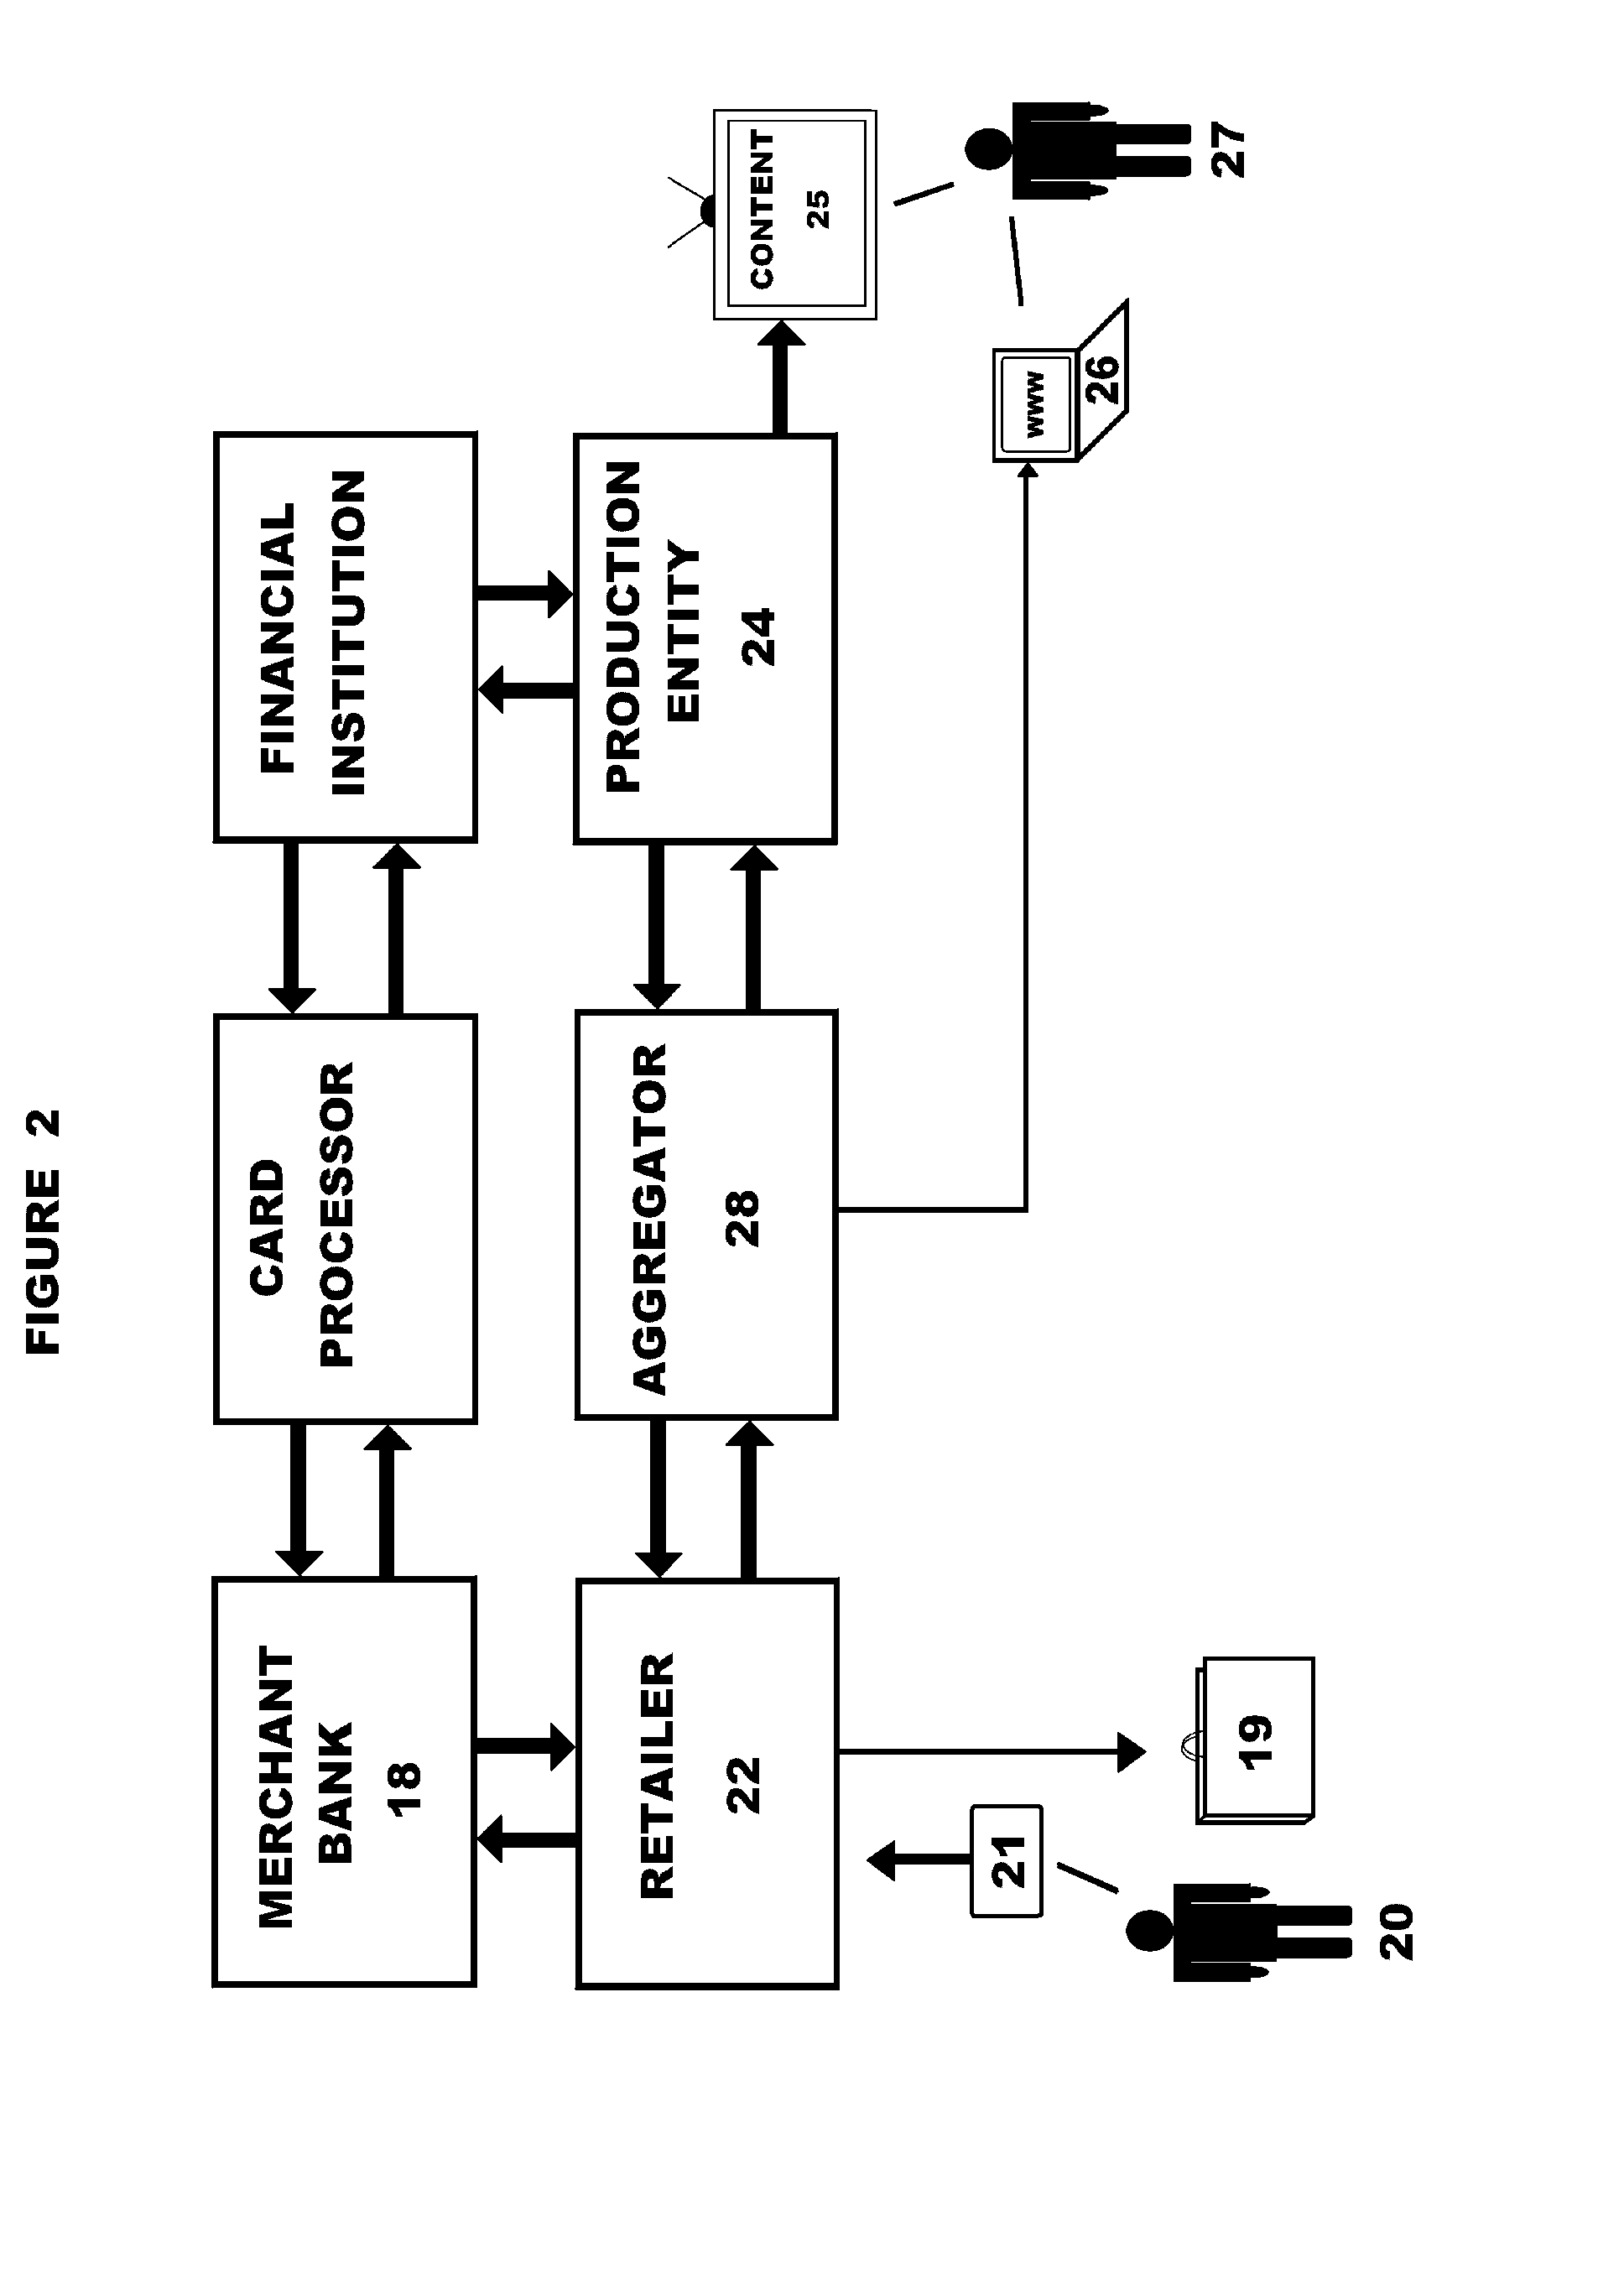 System and method of gathering and disseminating data about prop, wardrobe and set dressing items used in the creation of motion picture content